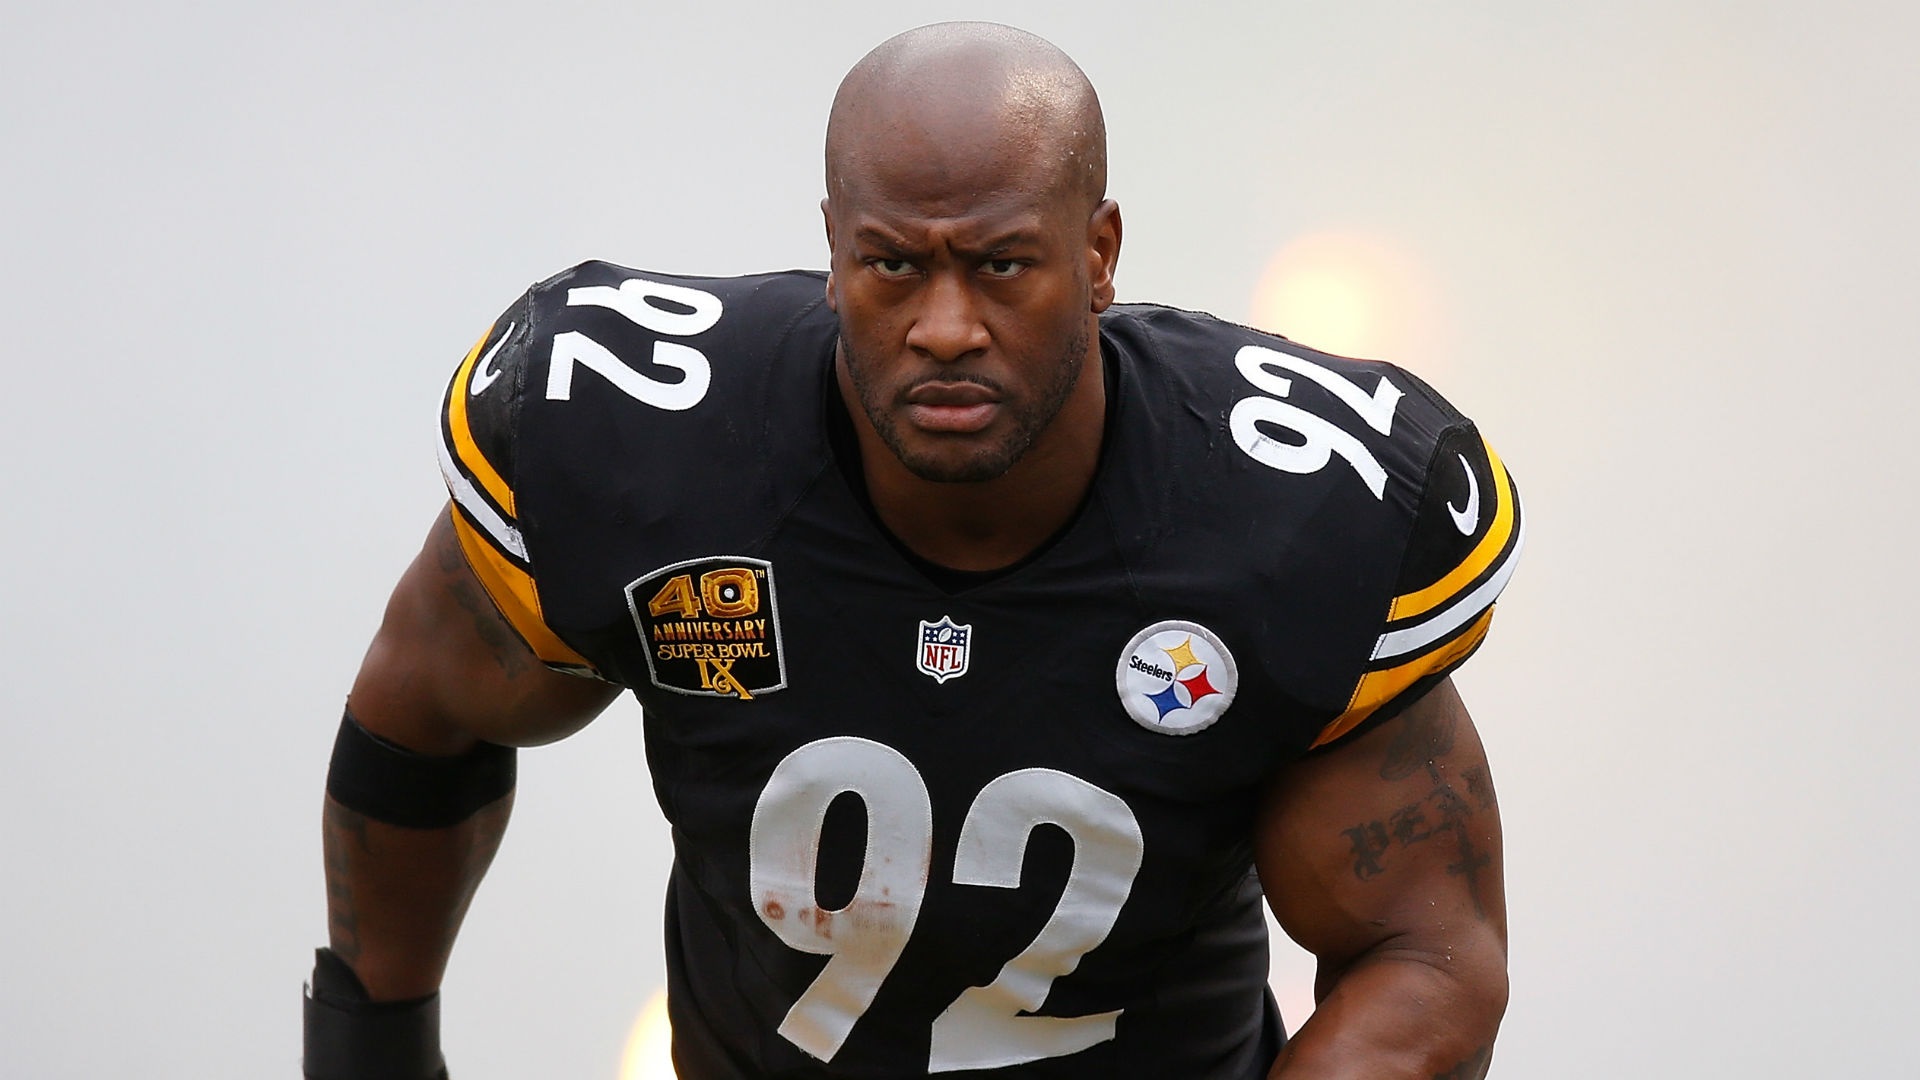 NFL Linebacker James Harrison Responds To PED Allegations With A Show Of Strength